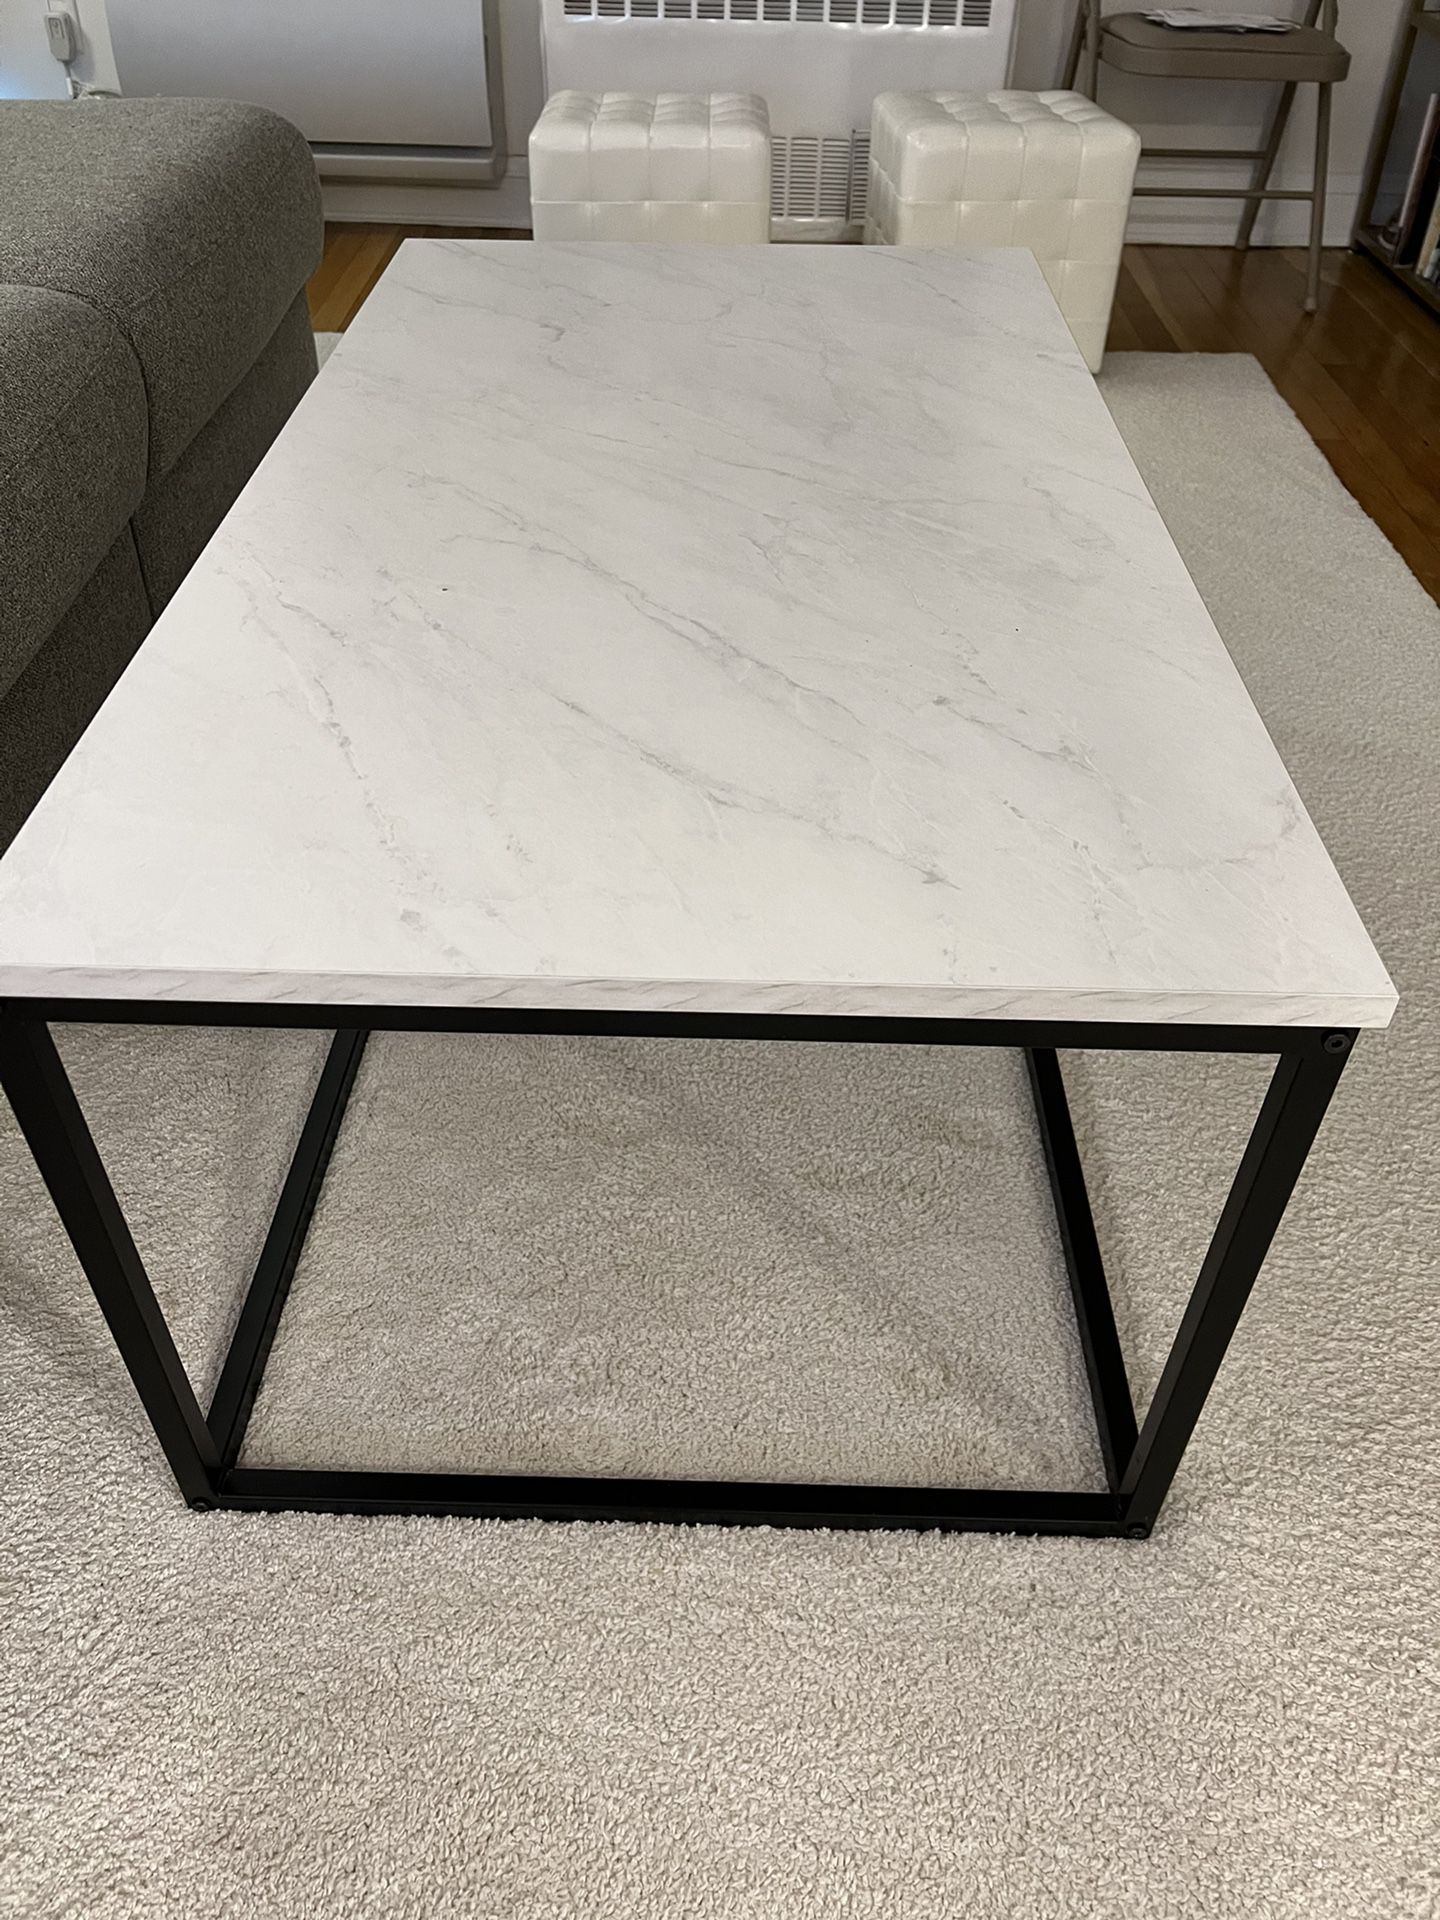 Used White Coffee Table From Amazon (Excellent Condition)